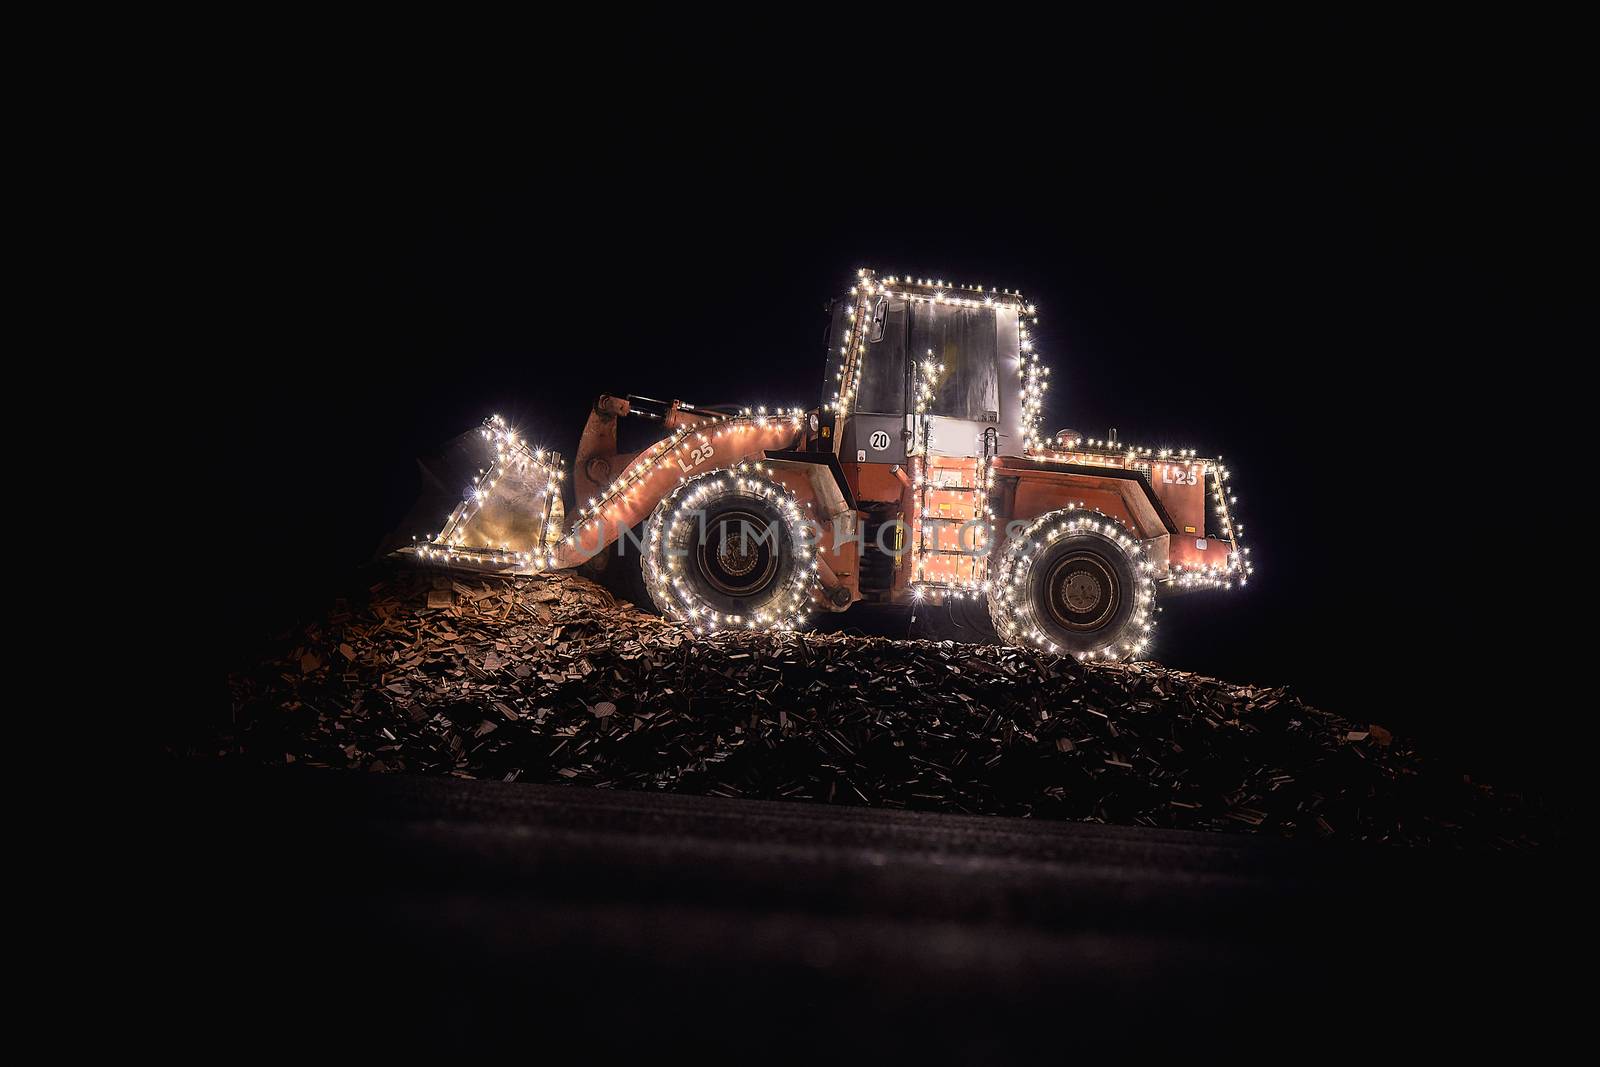 Blurred wheel loader decorated with lights by Sirius3001